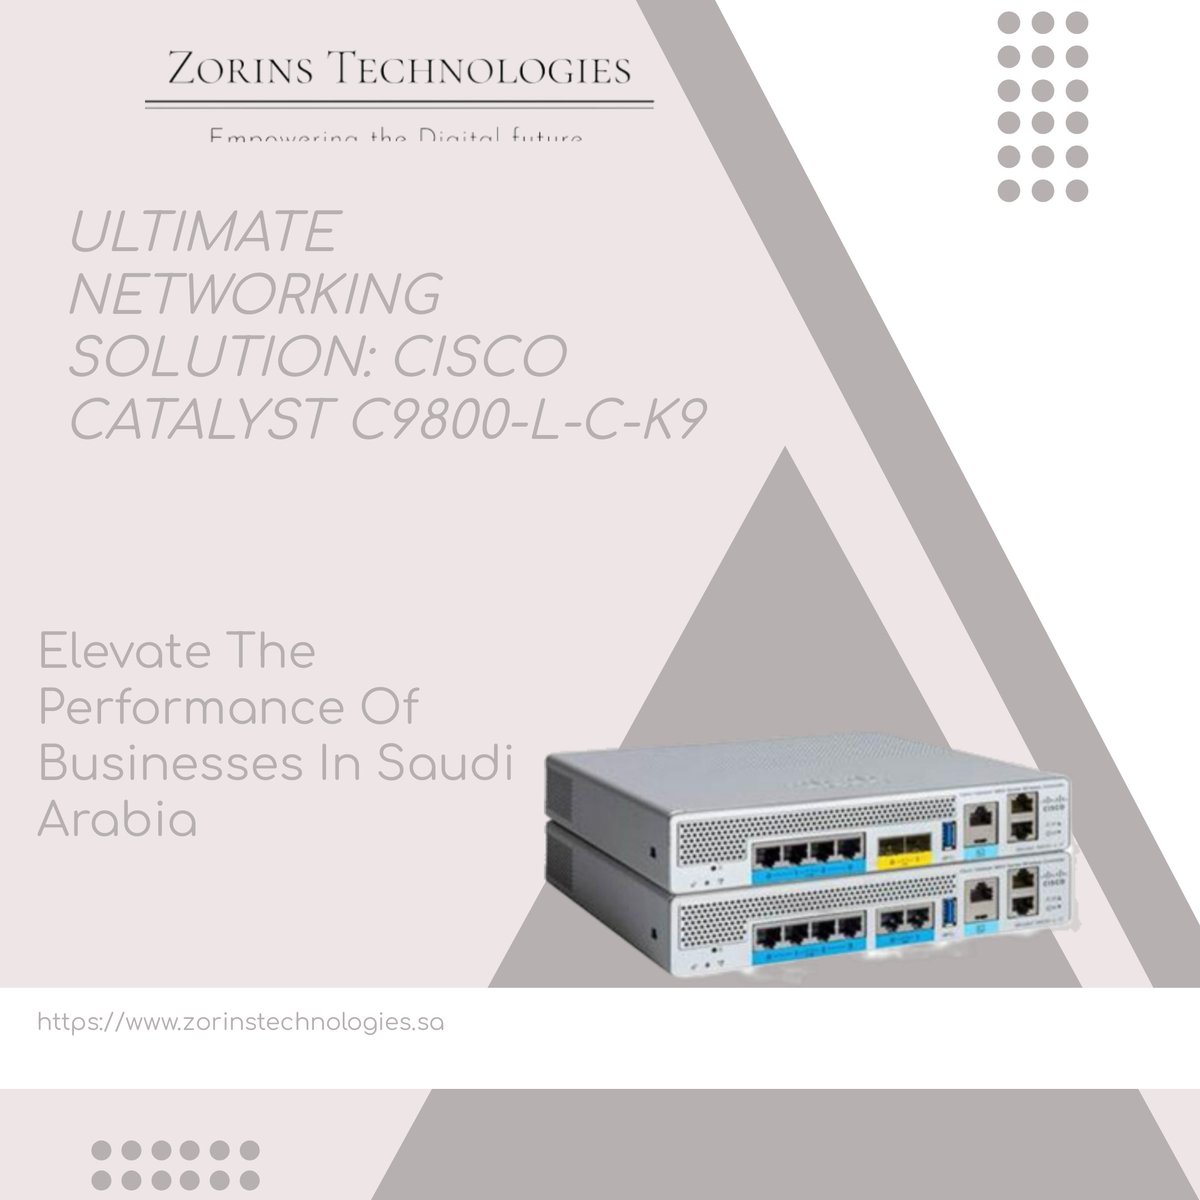 Cisco Catalyst C9800-L-C-K9, a cutting-edge networking solution designed to revolutionize performance, security, and scalability. 

#Cisco #IBM #hp #Linksys #cisco #wireless #itsecurity #networkdesign #networkequipment #datacenterinfrastructure #itservicemanagement